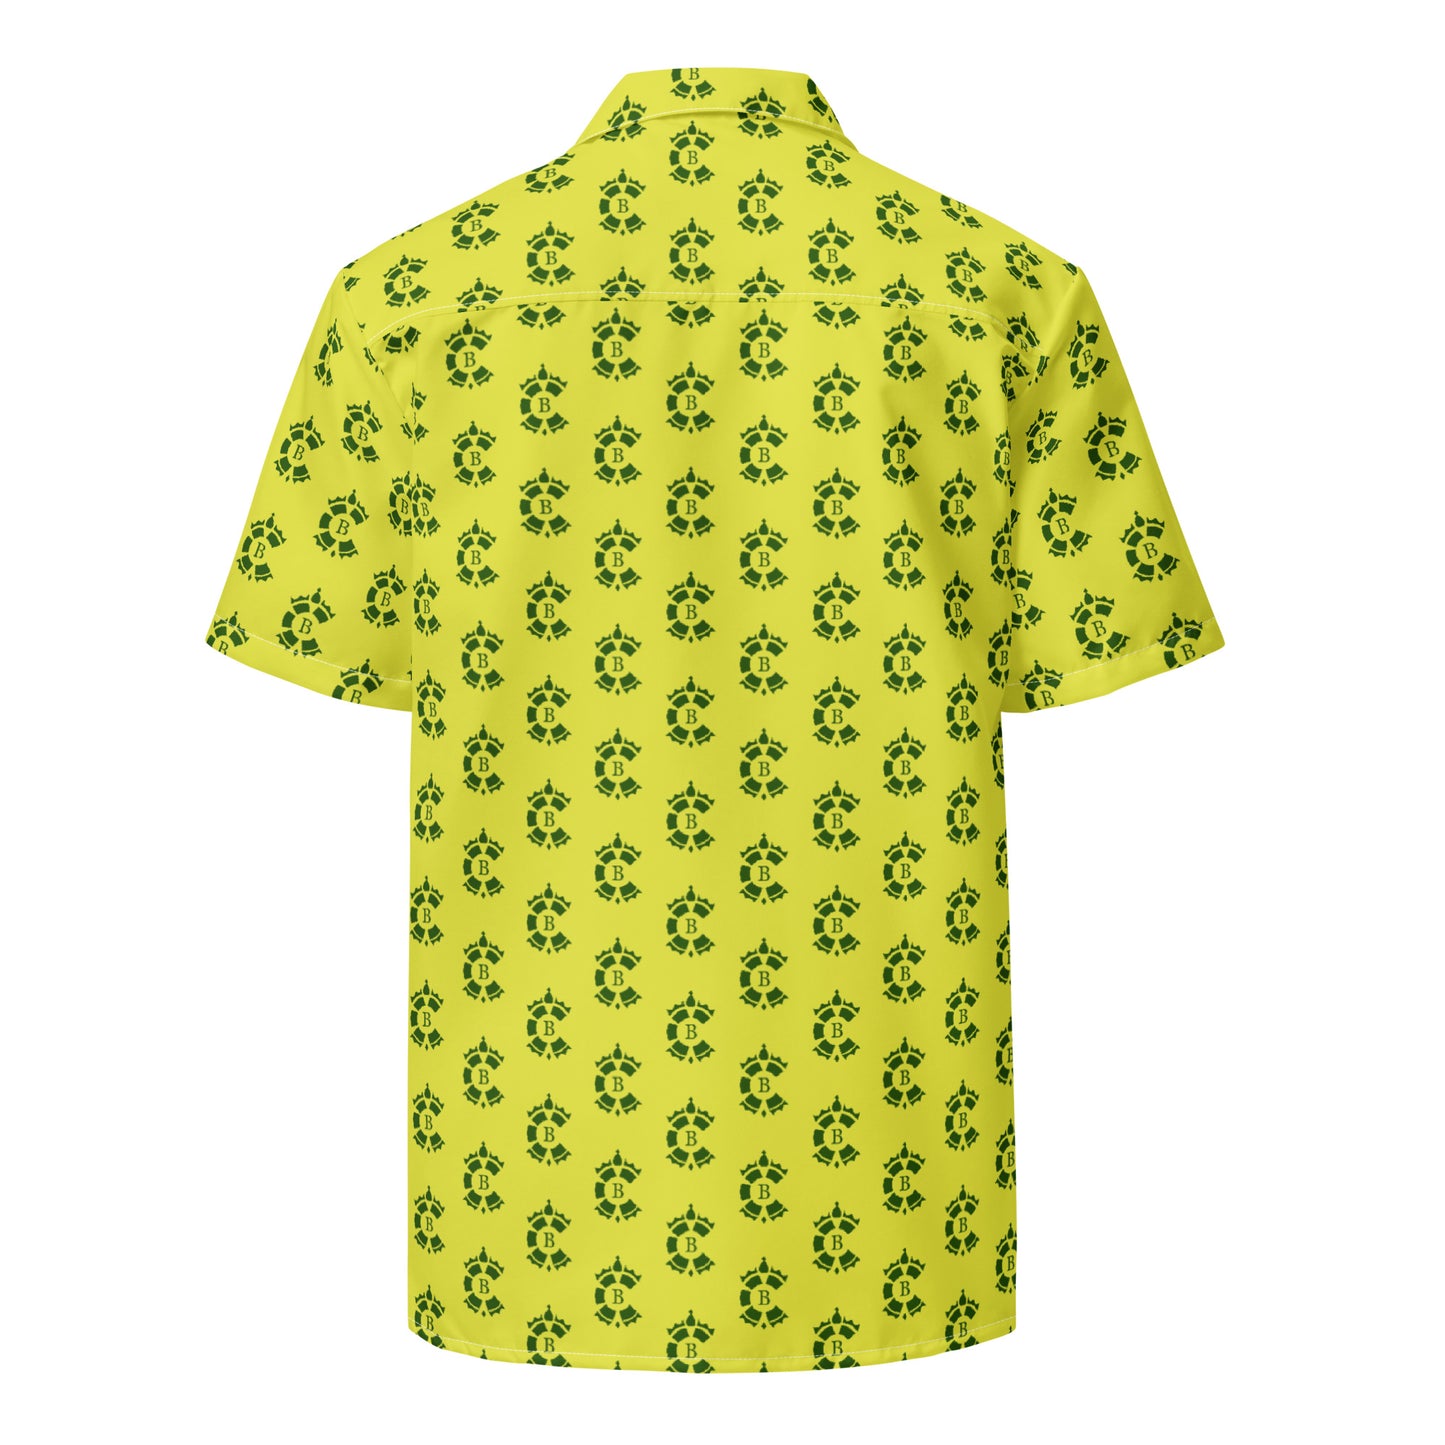 CONTRABRANDED R-Logos Button Up Short Sleeve Green on Yellow